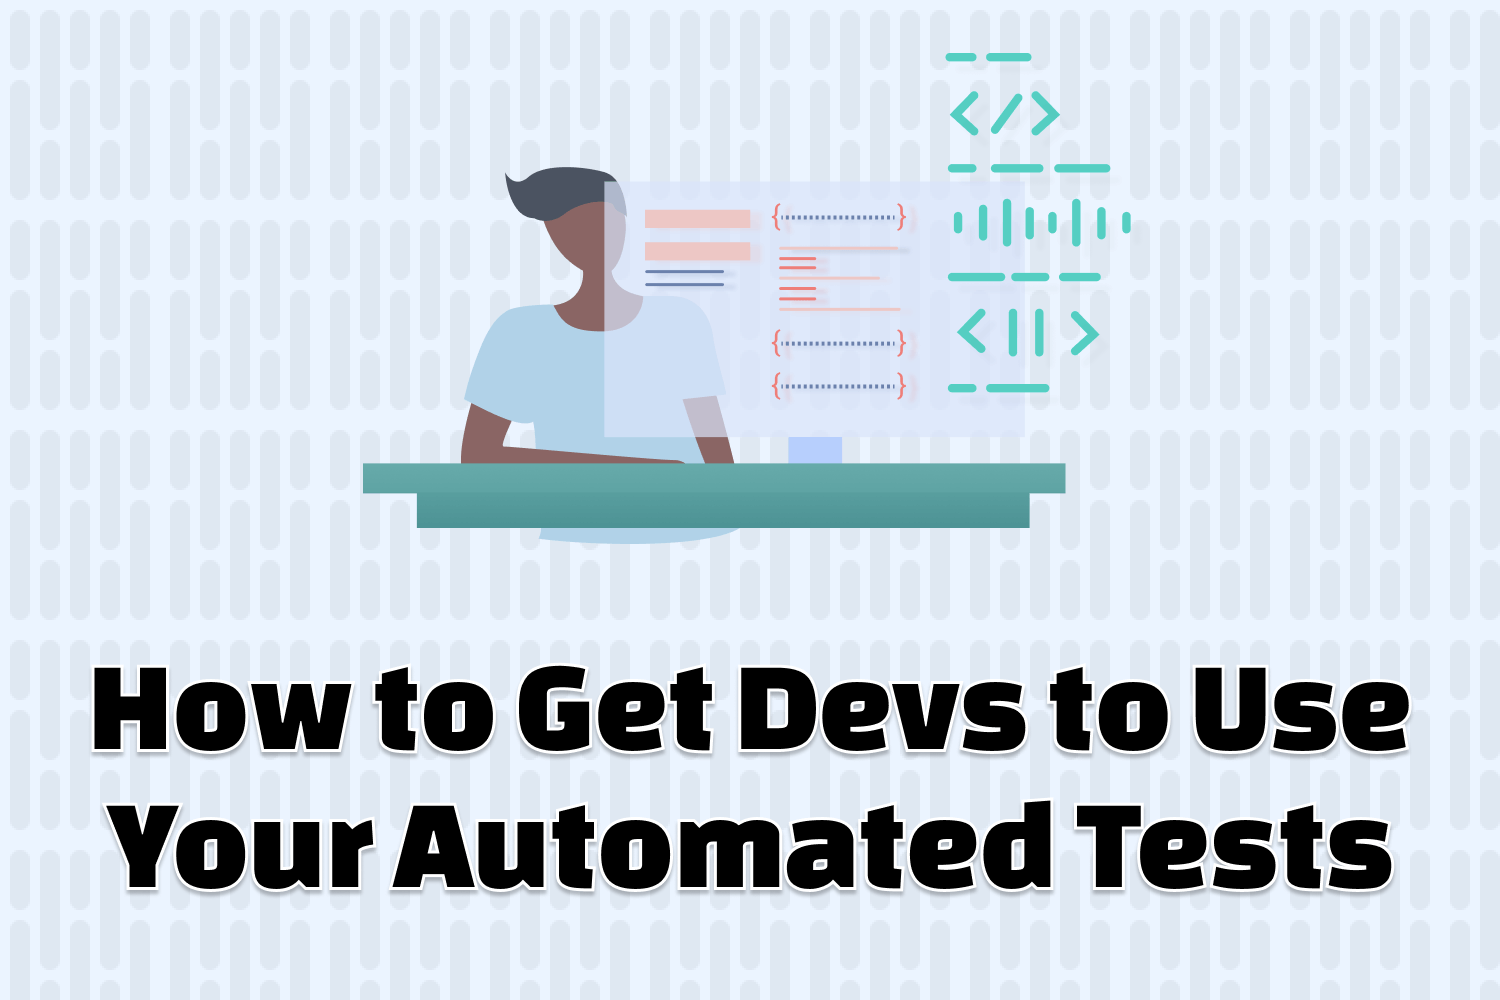 How to Get Devs to Use Your Automated Tests